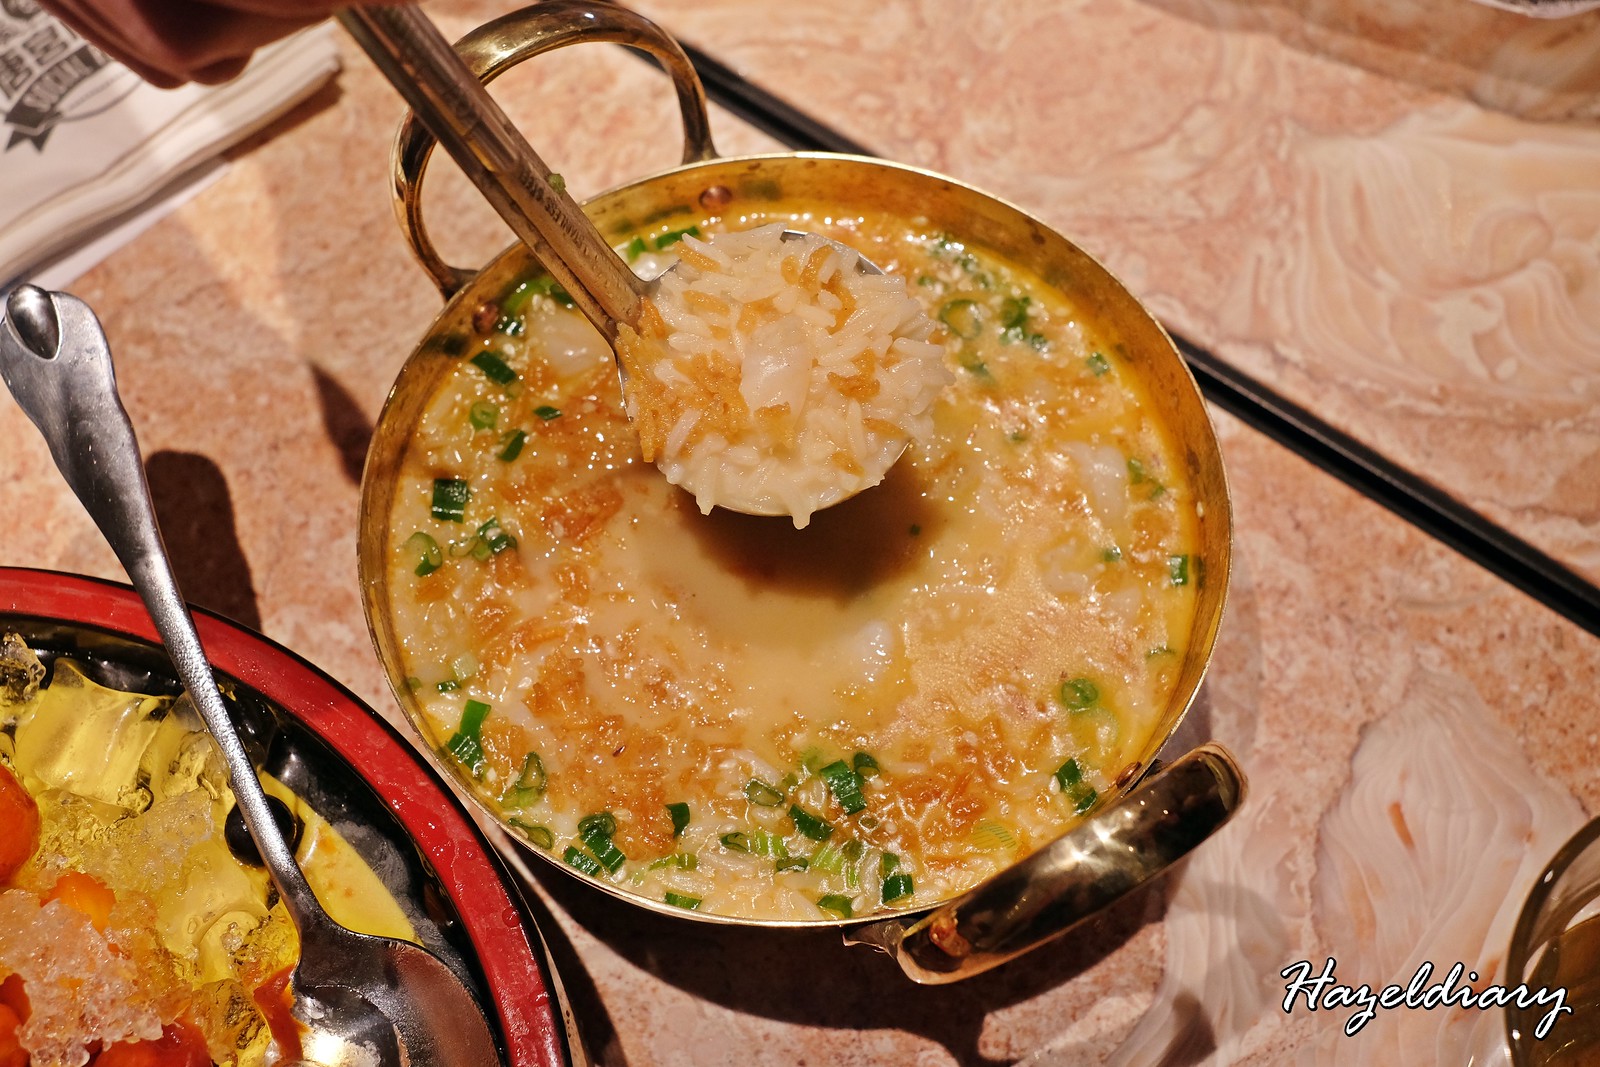 Social Place Restaurant-Seafood Crackling Rice Soup